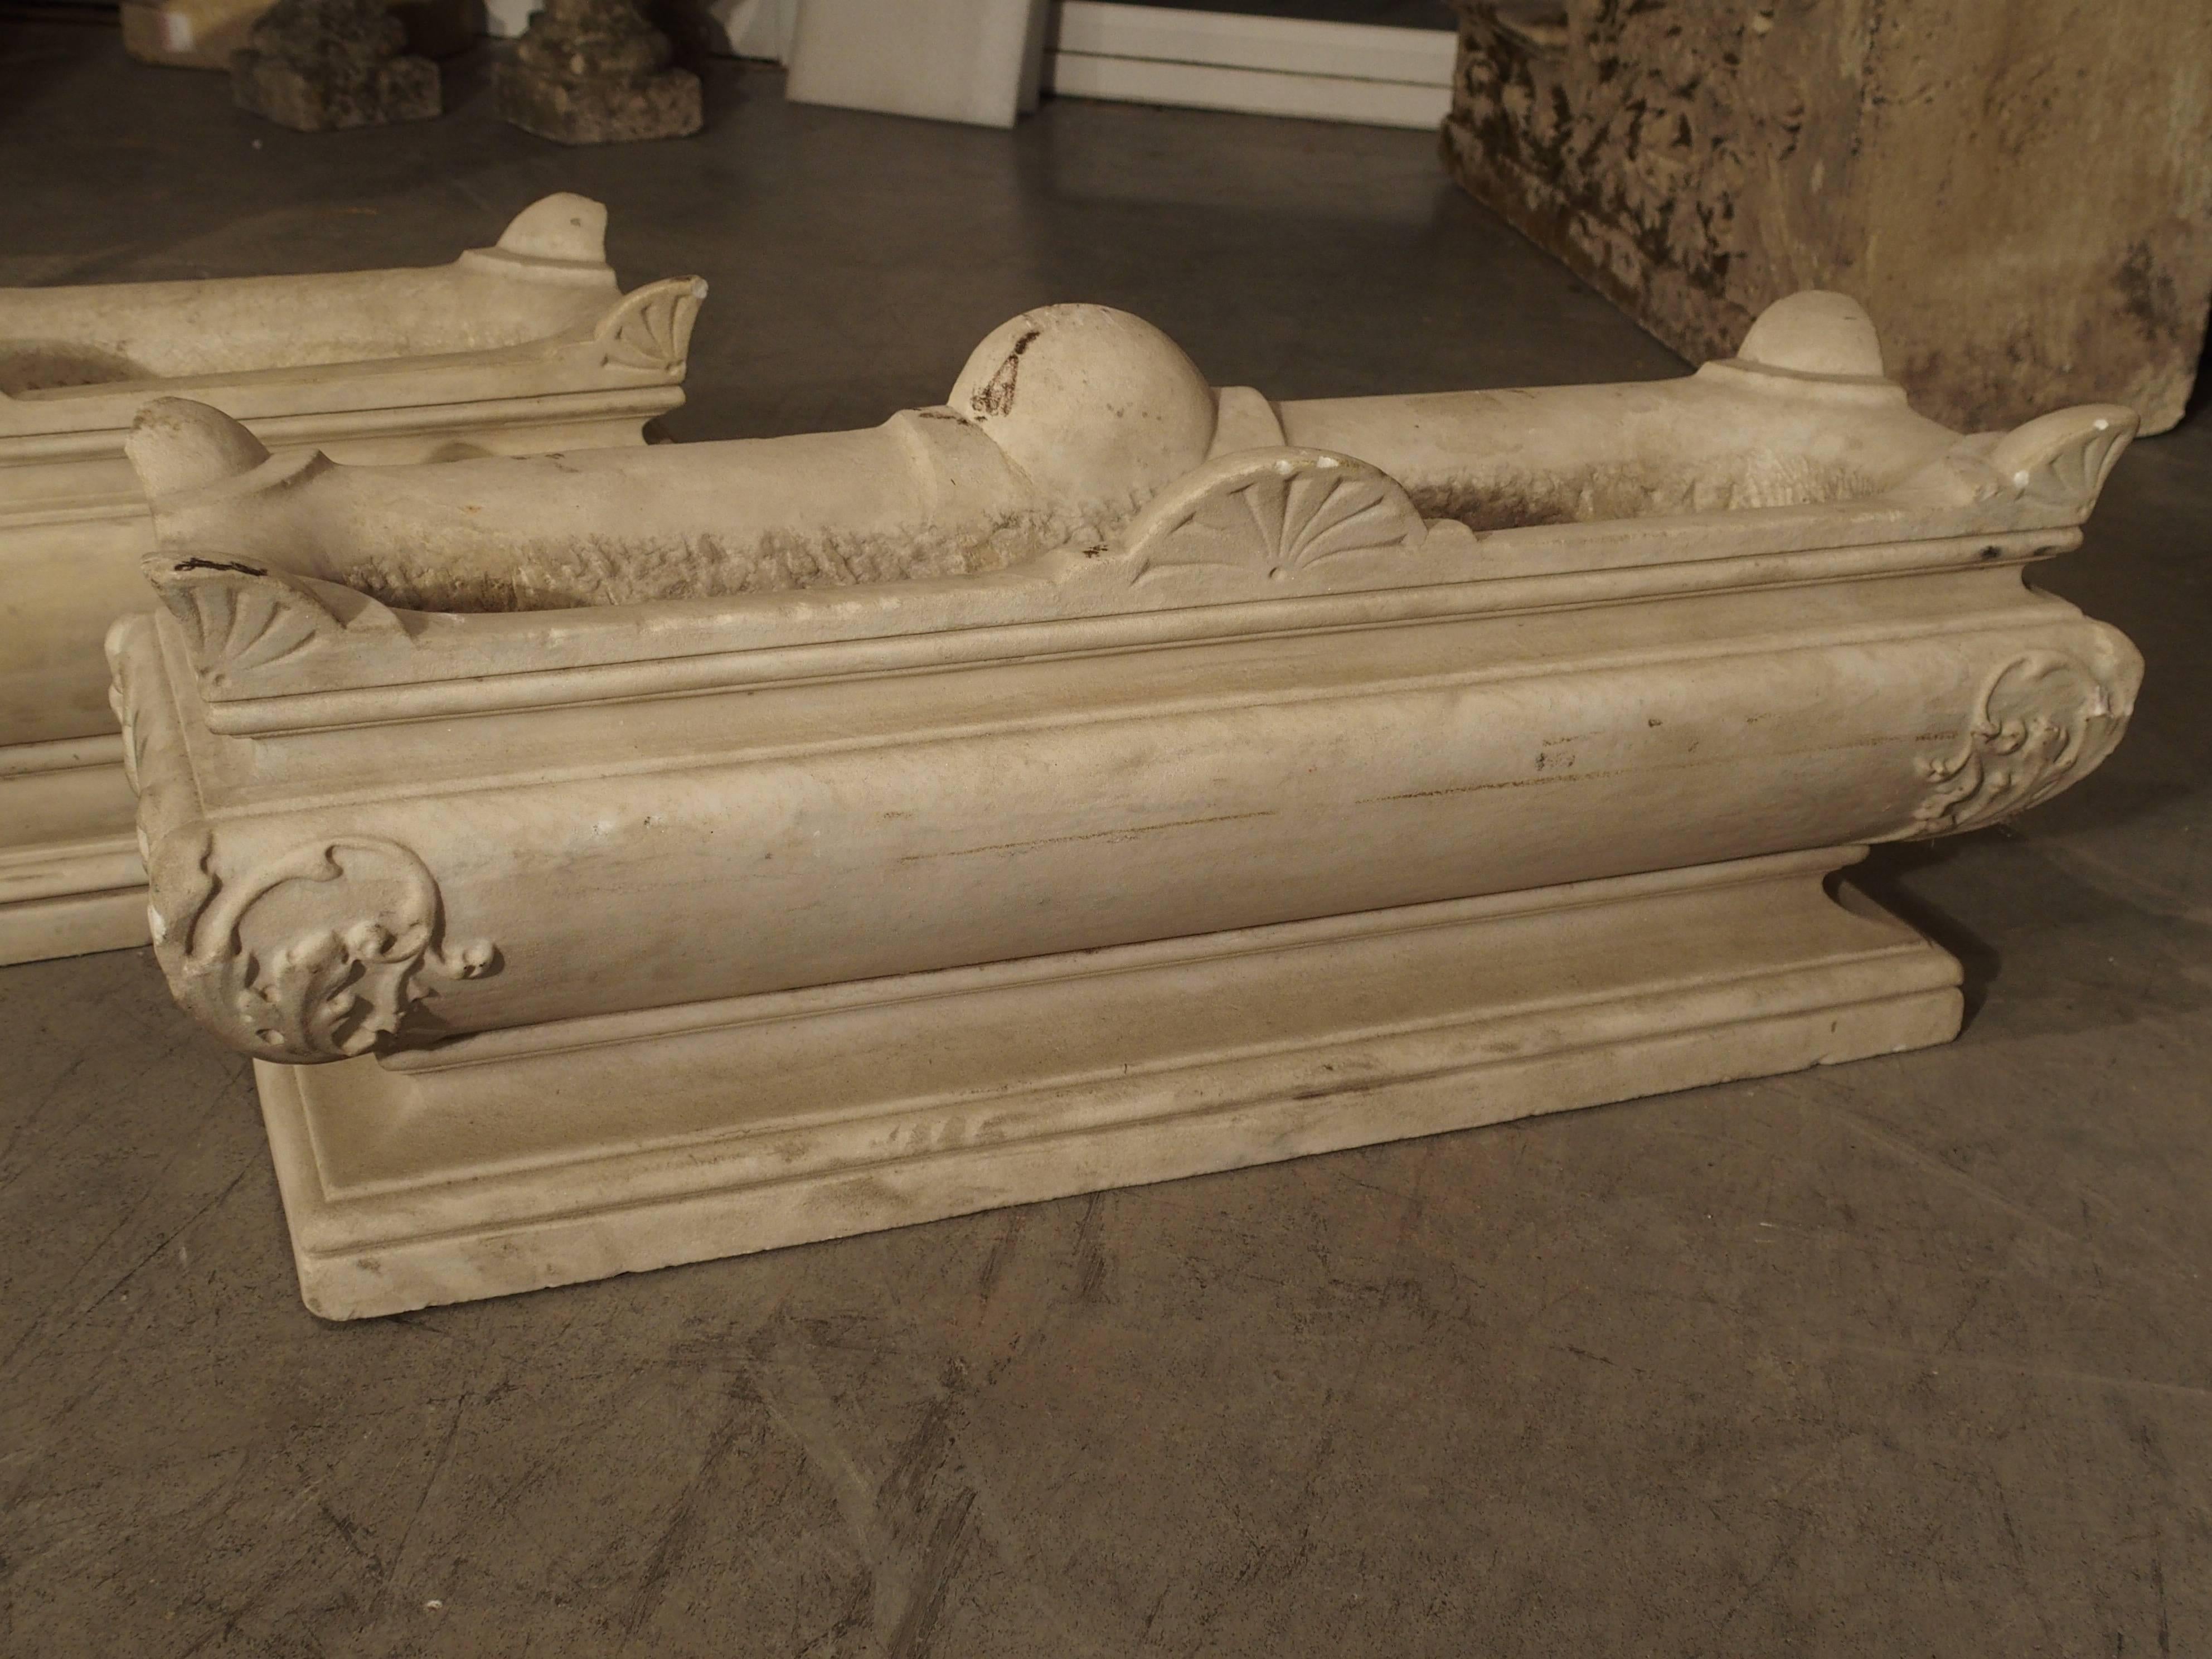 This wonderful pair of rectangular, cream colored, marble jardinières from Italy has ornamentation of stylized shells on the top rims and delicate scrolling leaves at the corners of the bodies. All of this rests upon a rectangular base. They have